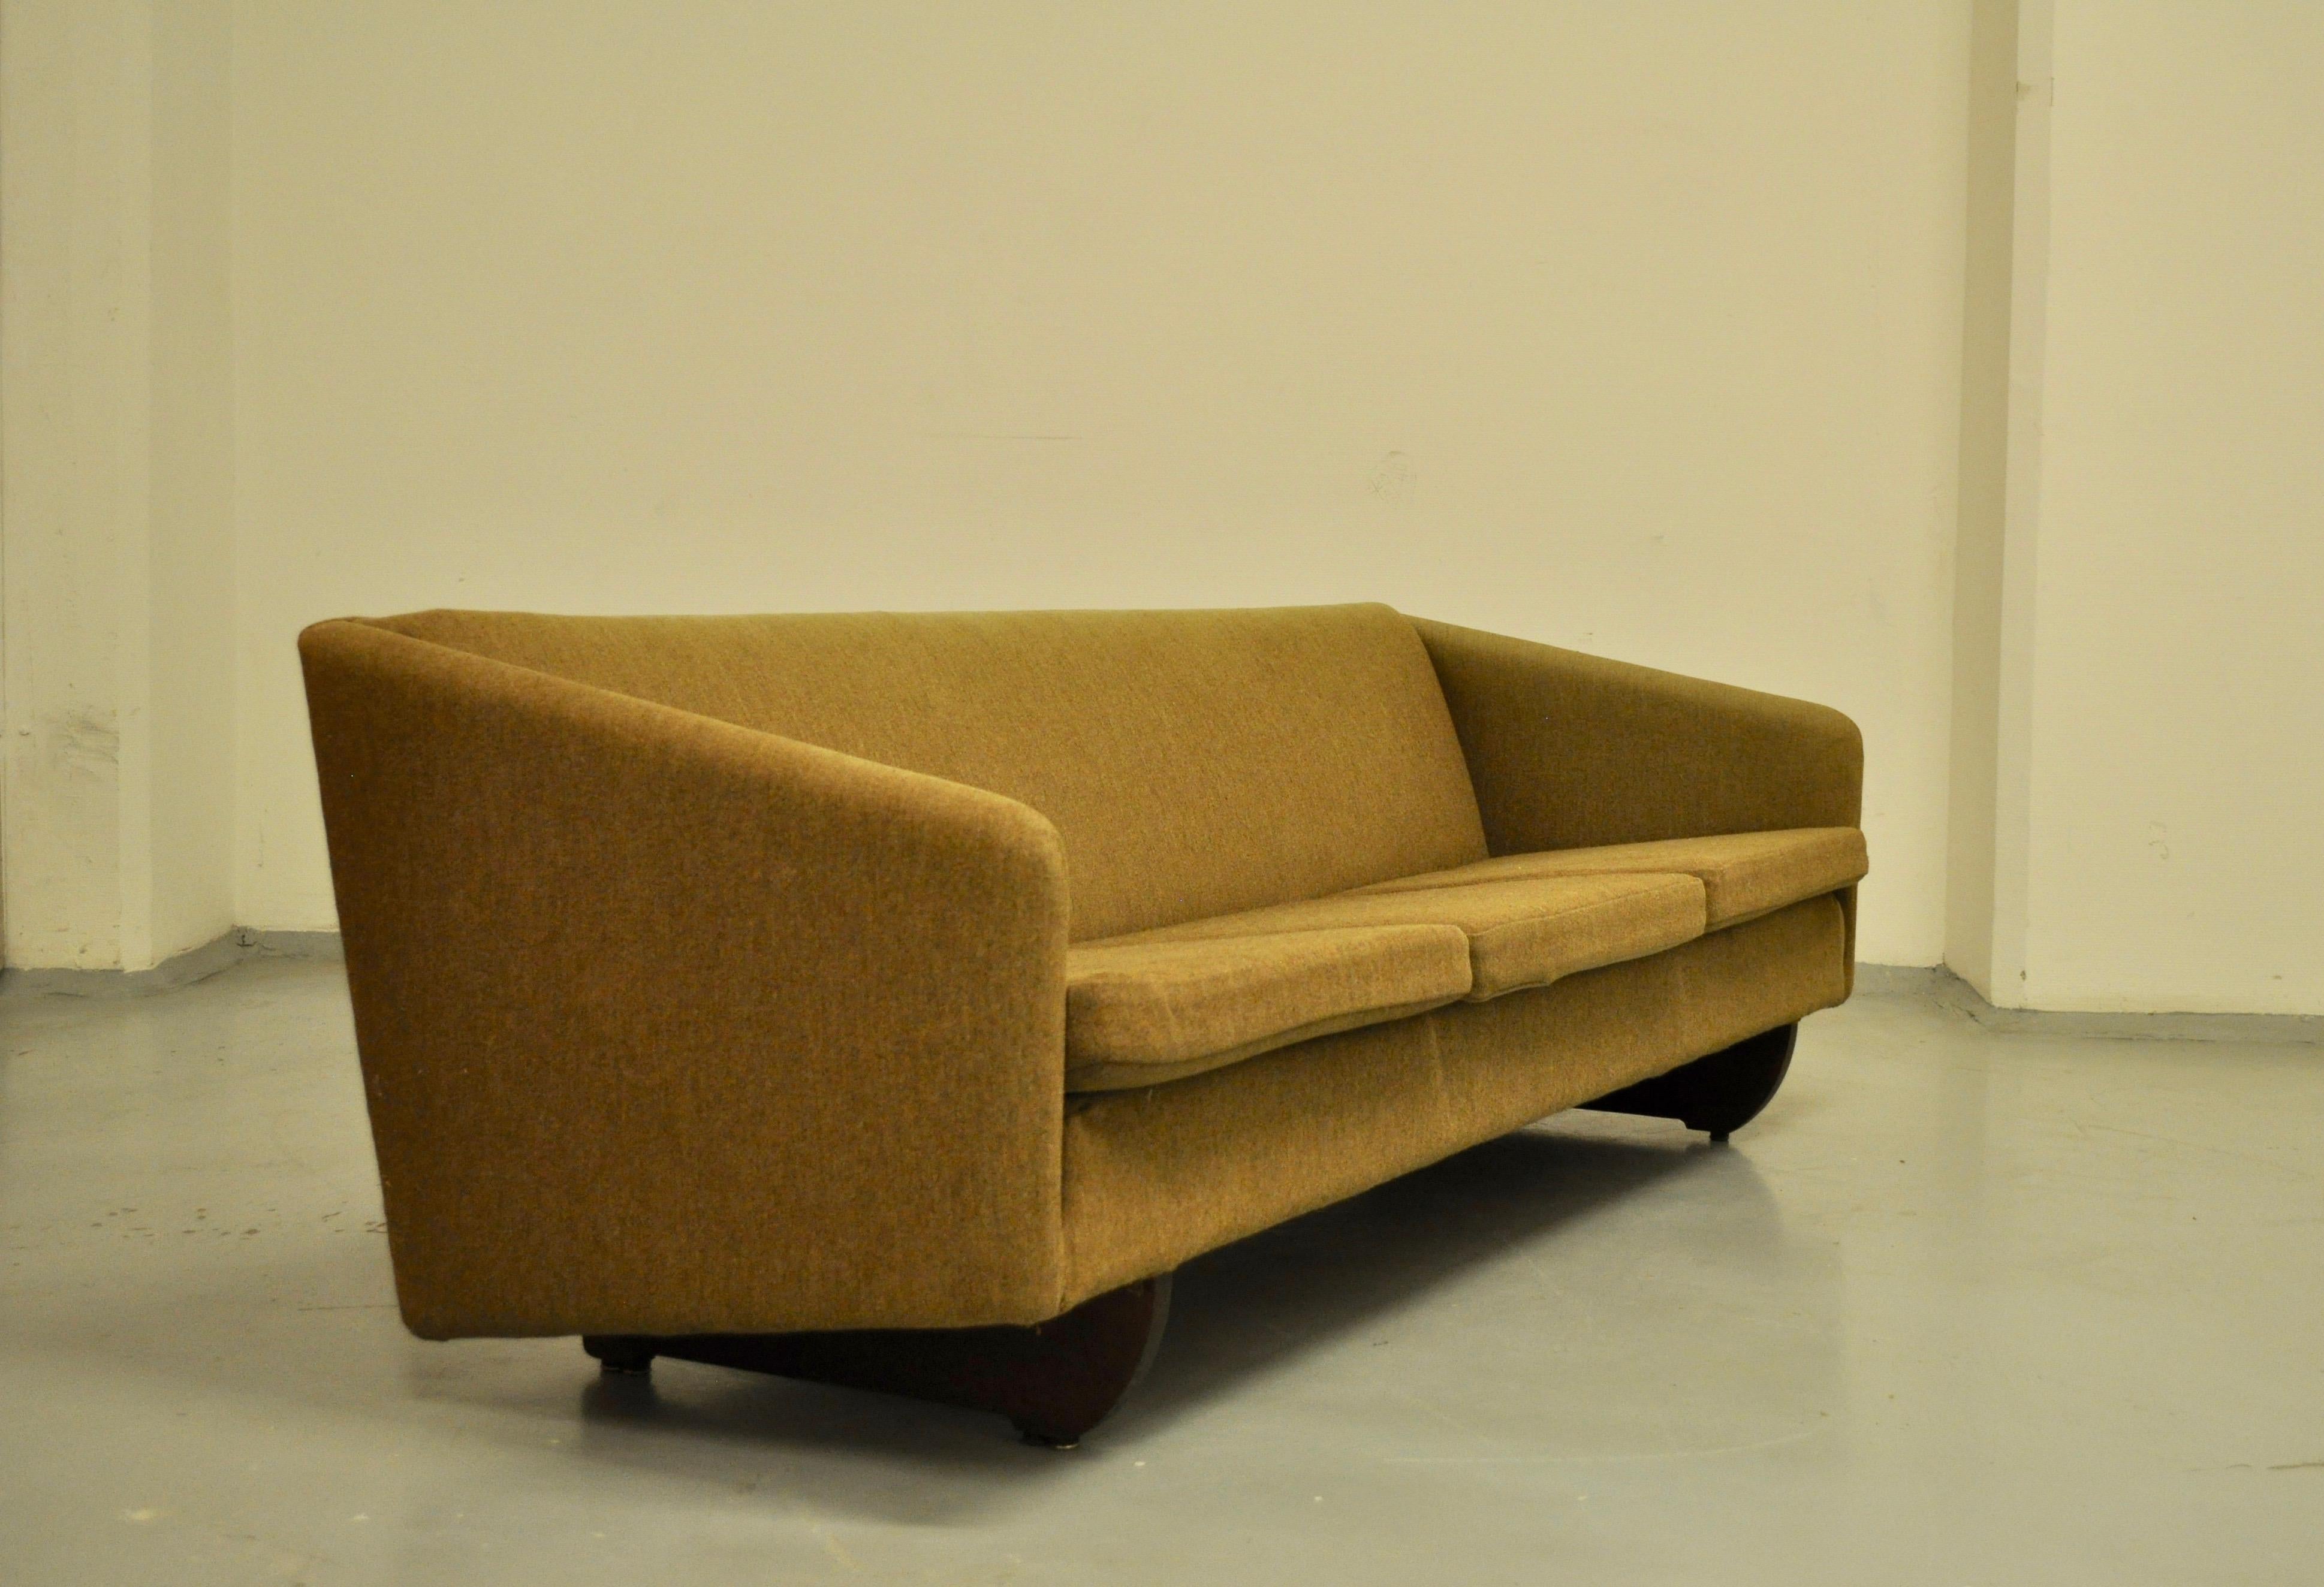 Danish sofa designed by Illum Wikkelso wearing its original fabric. Its beech base responds to a customer's special order and makes it even more rare.